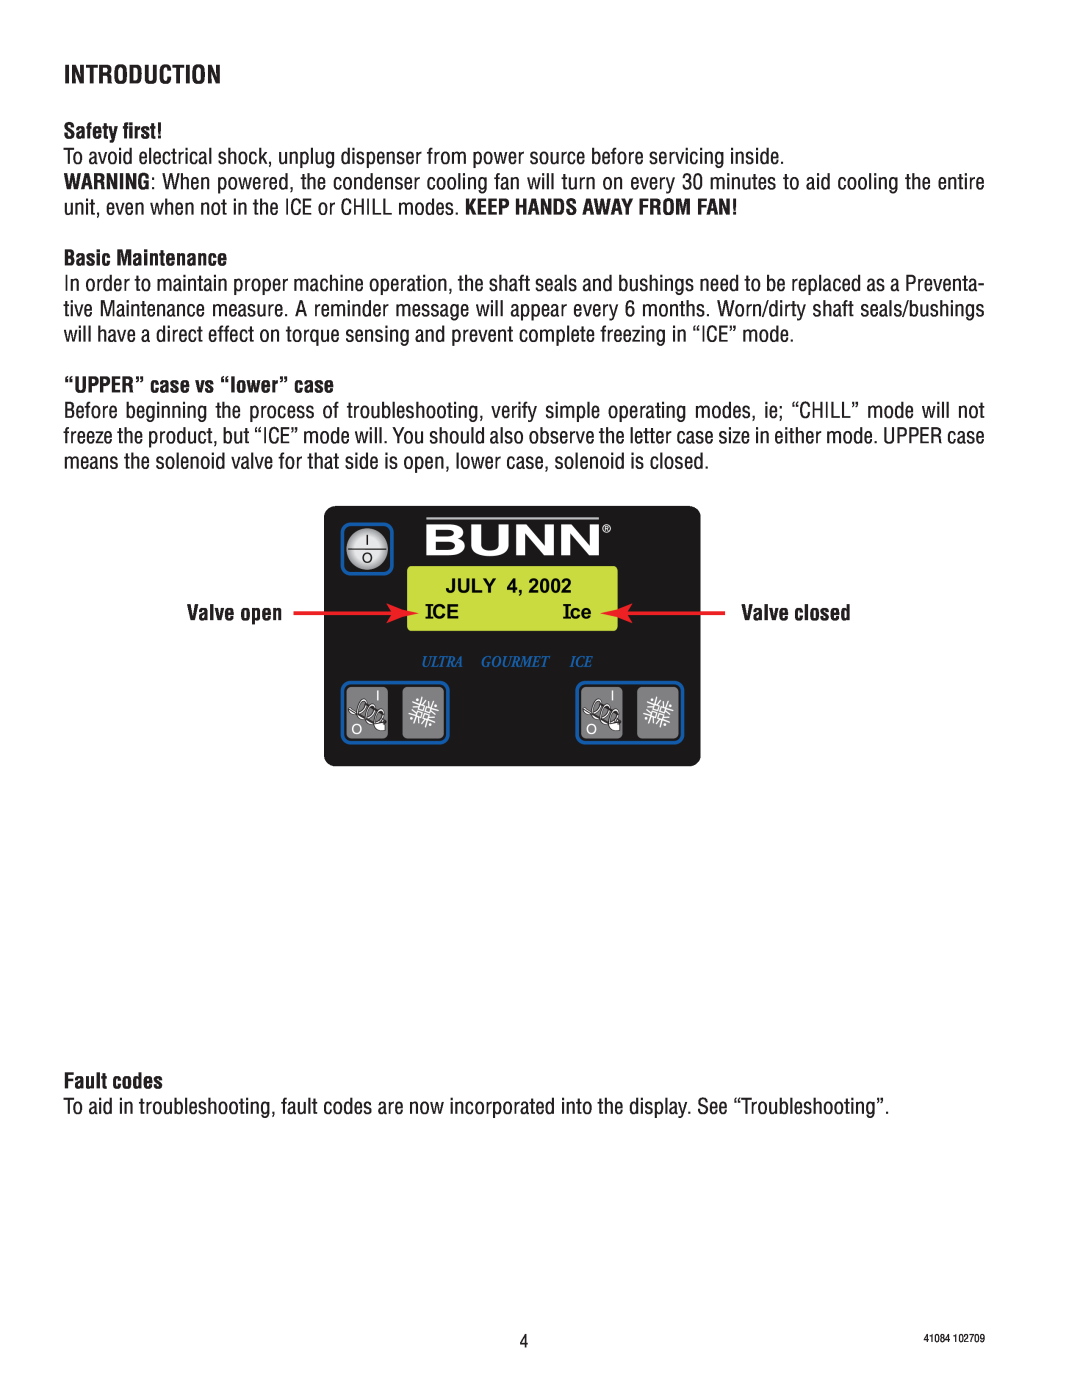 Bunn ULTRA-1 manual Introduction, Safety first, Basic Maintenance, “UPPER” case vs “lower” case, Valve open, Fault codes 